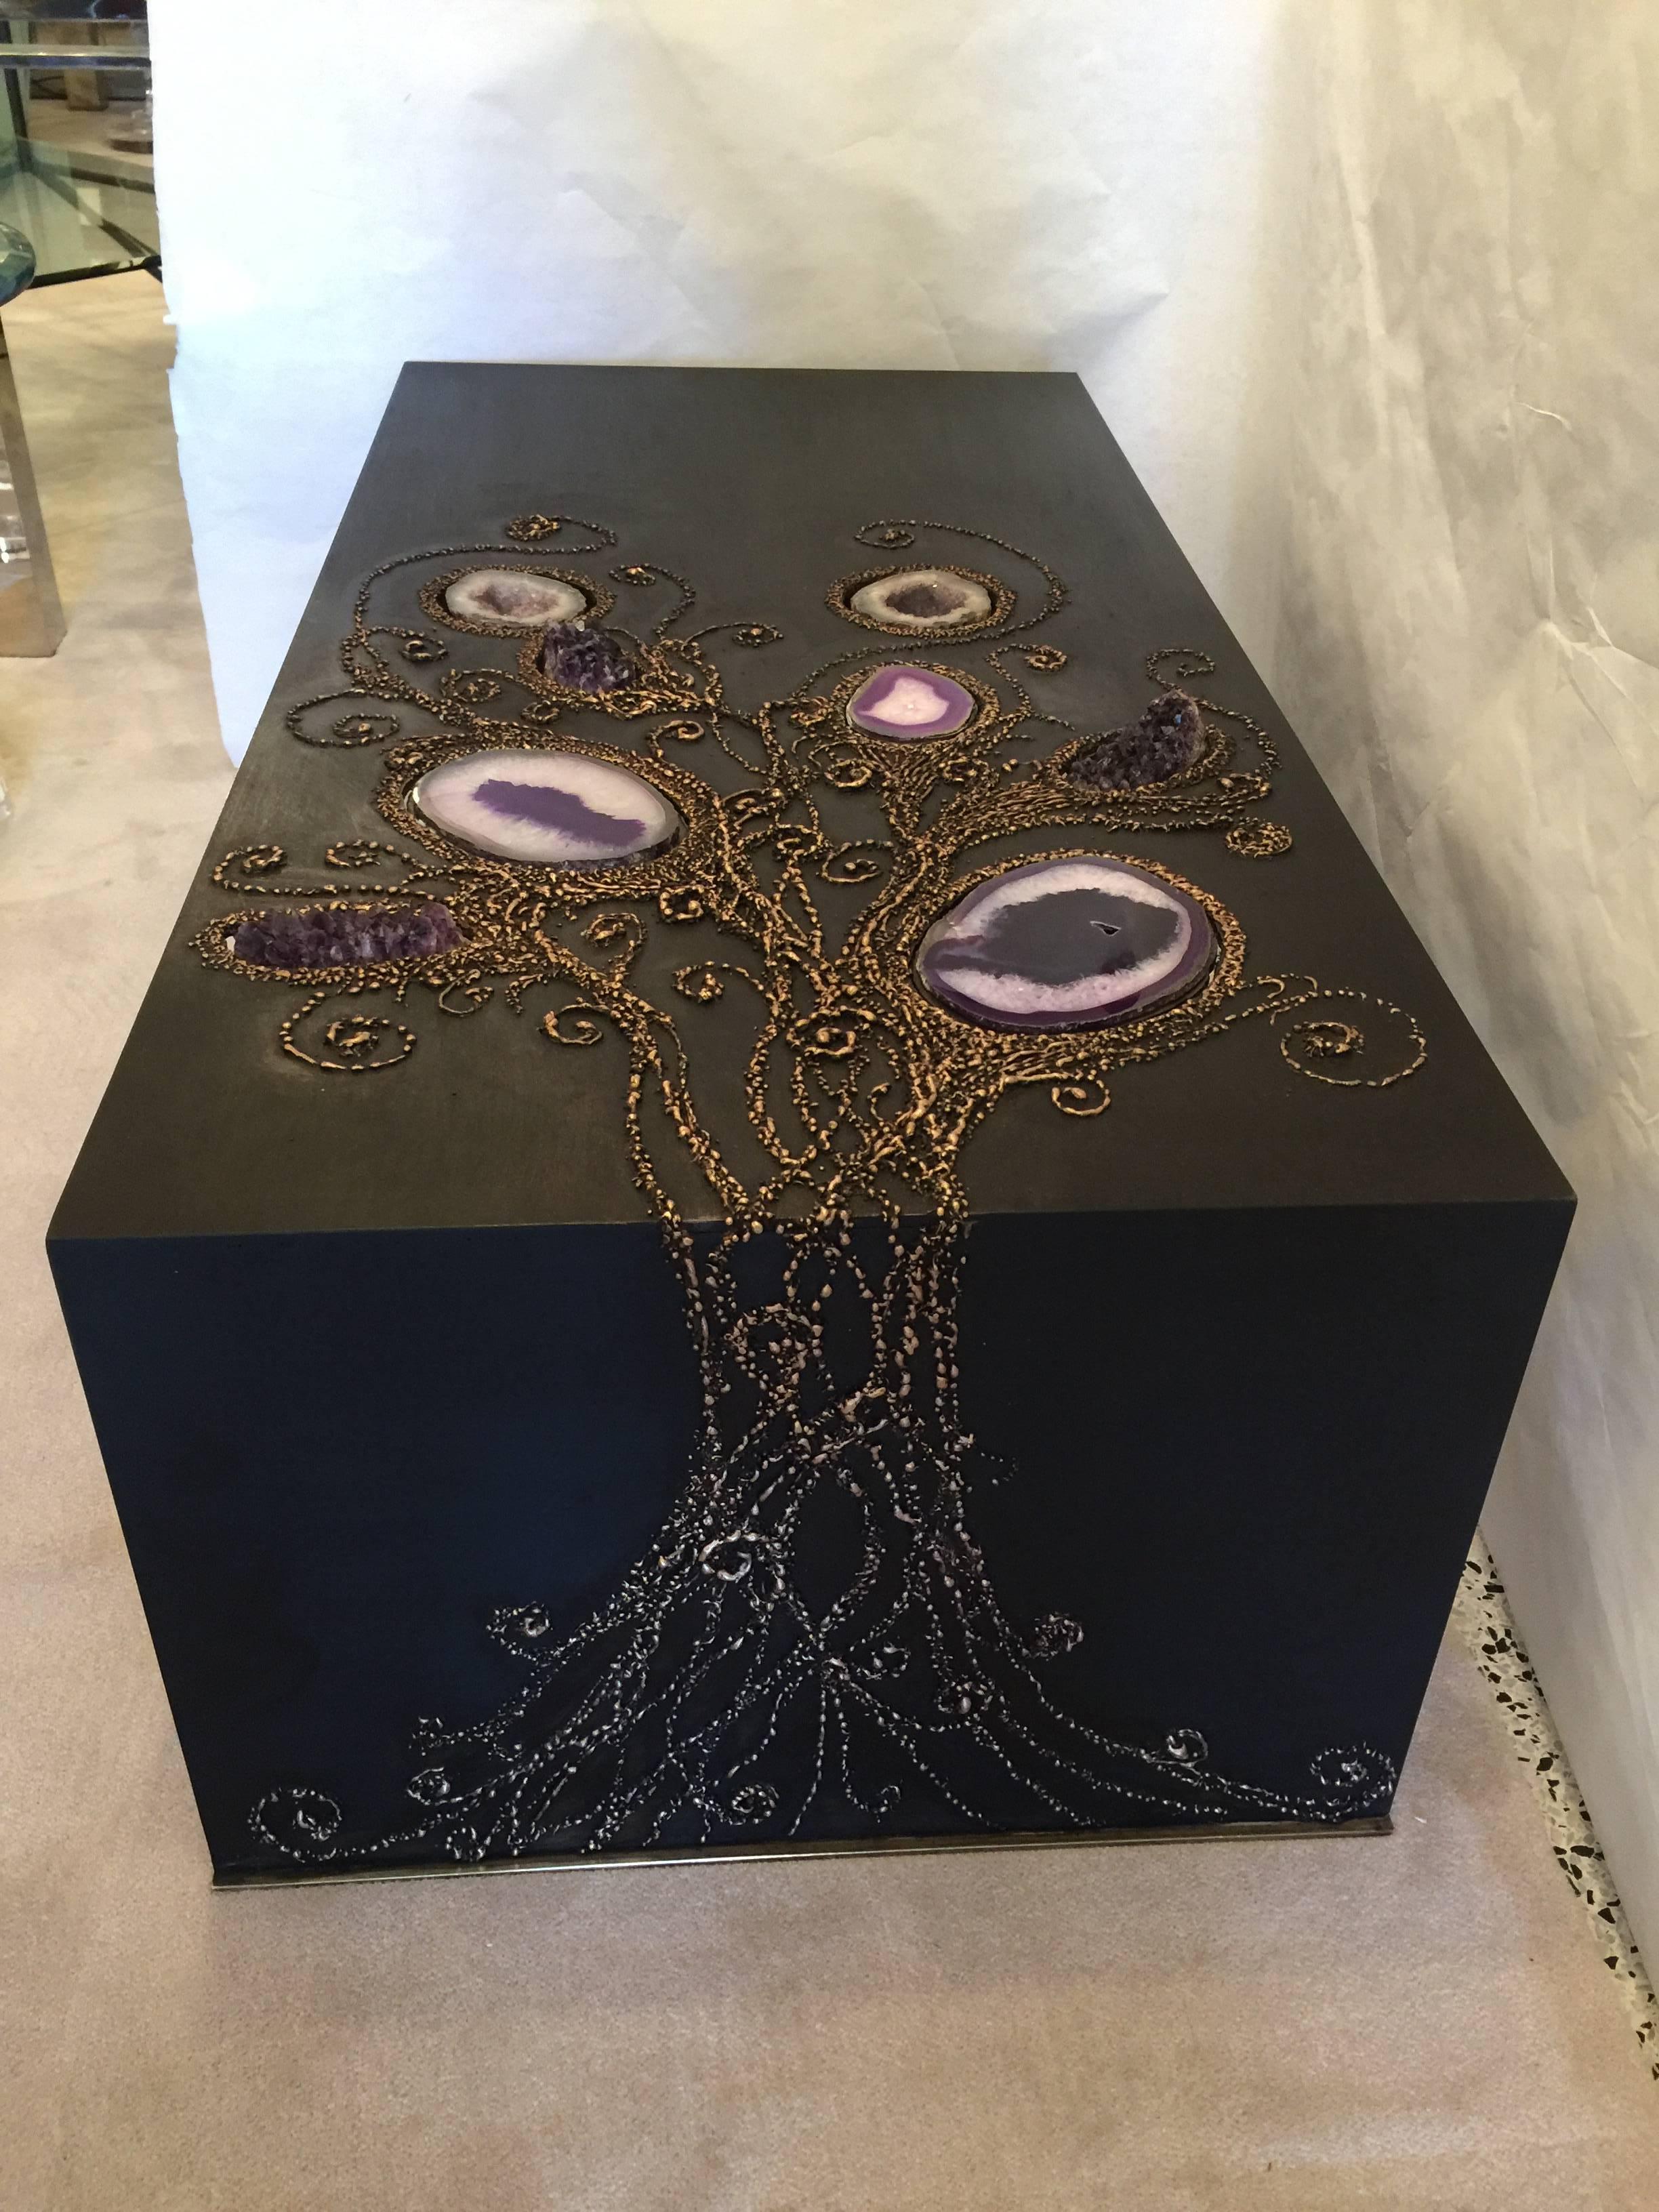 This true labour of love designed cocktail table boasts encrusted natural agate stone, amethyst chunks and quartz eggs. All rich bronze patina and brass trim base accent, the glimmer factor is truly on display in this one-of-a-kind custom table by